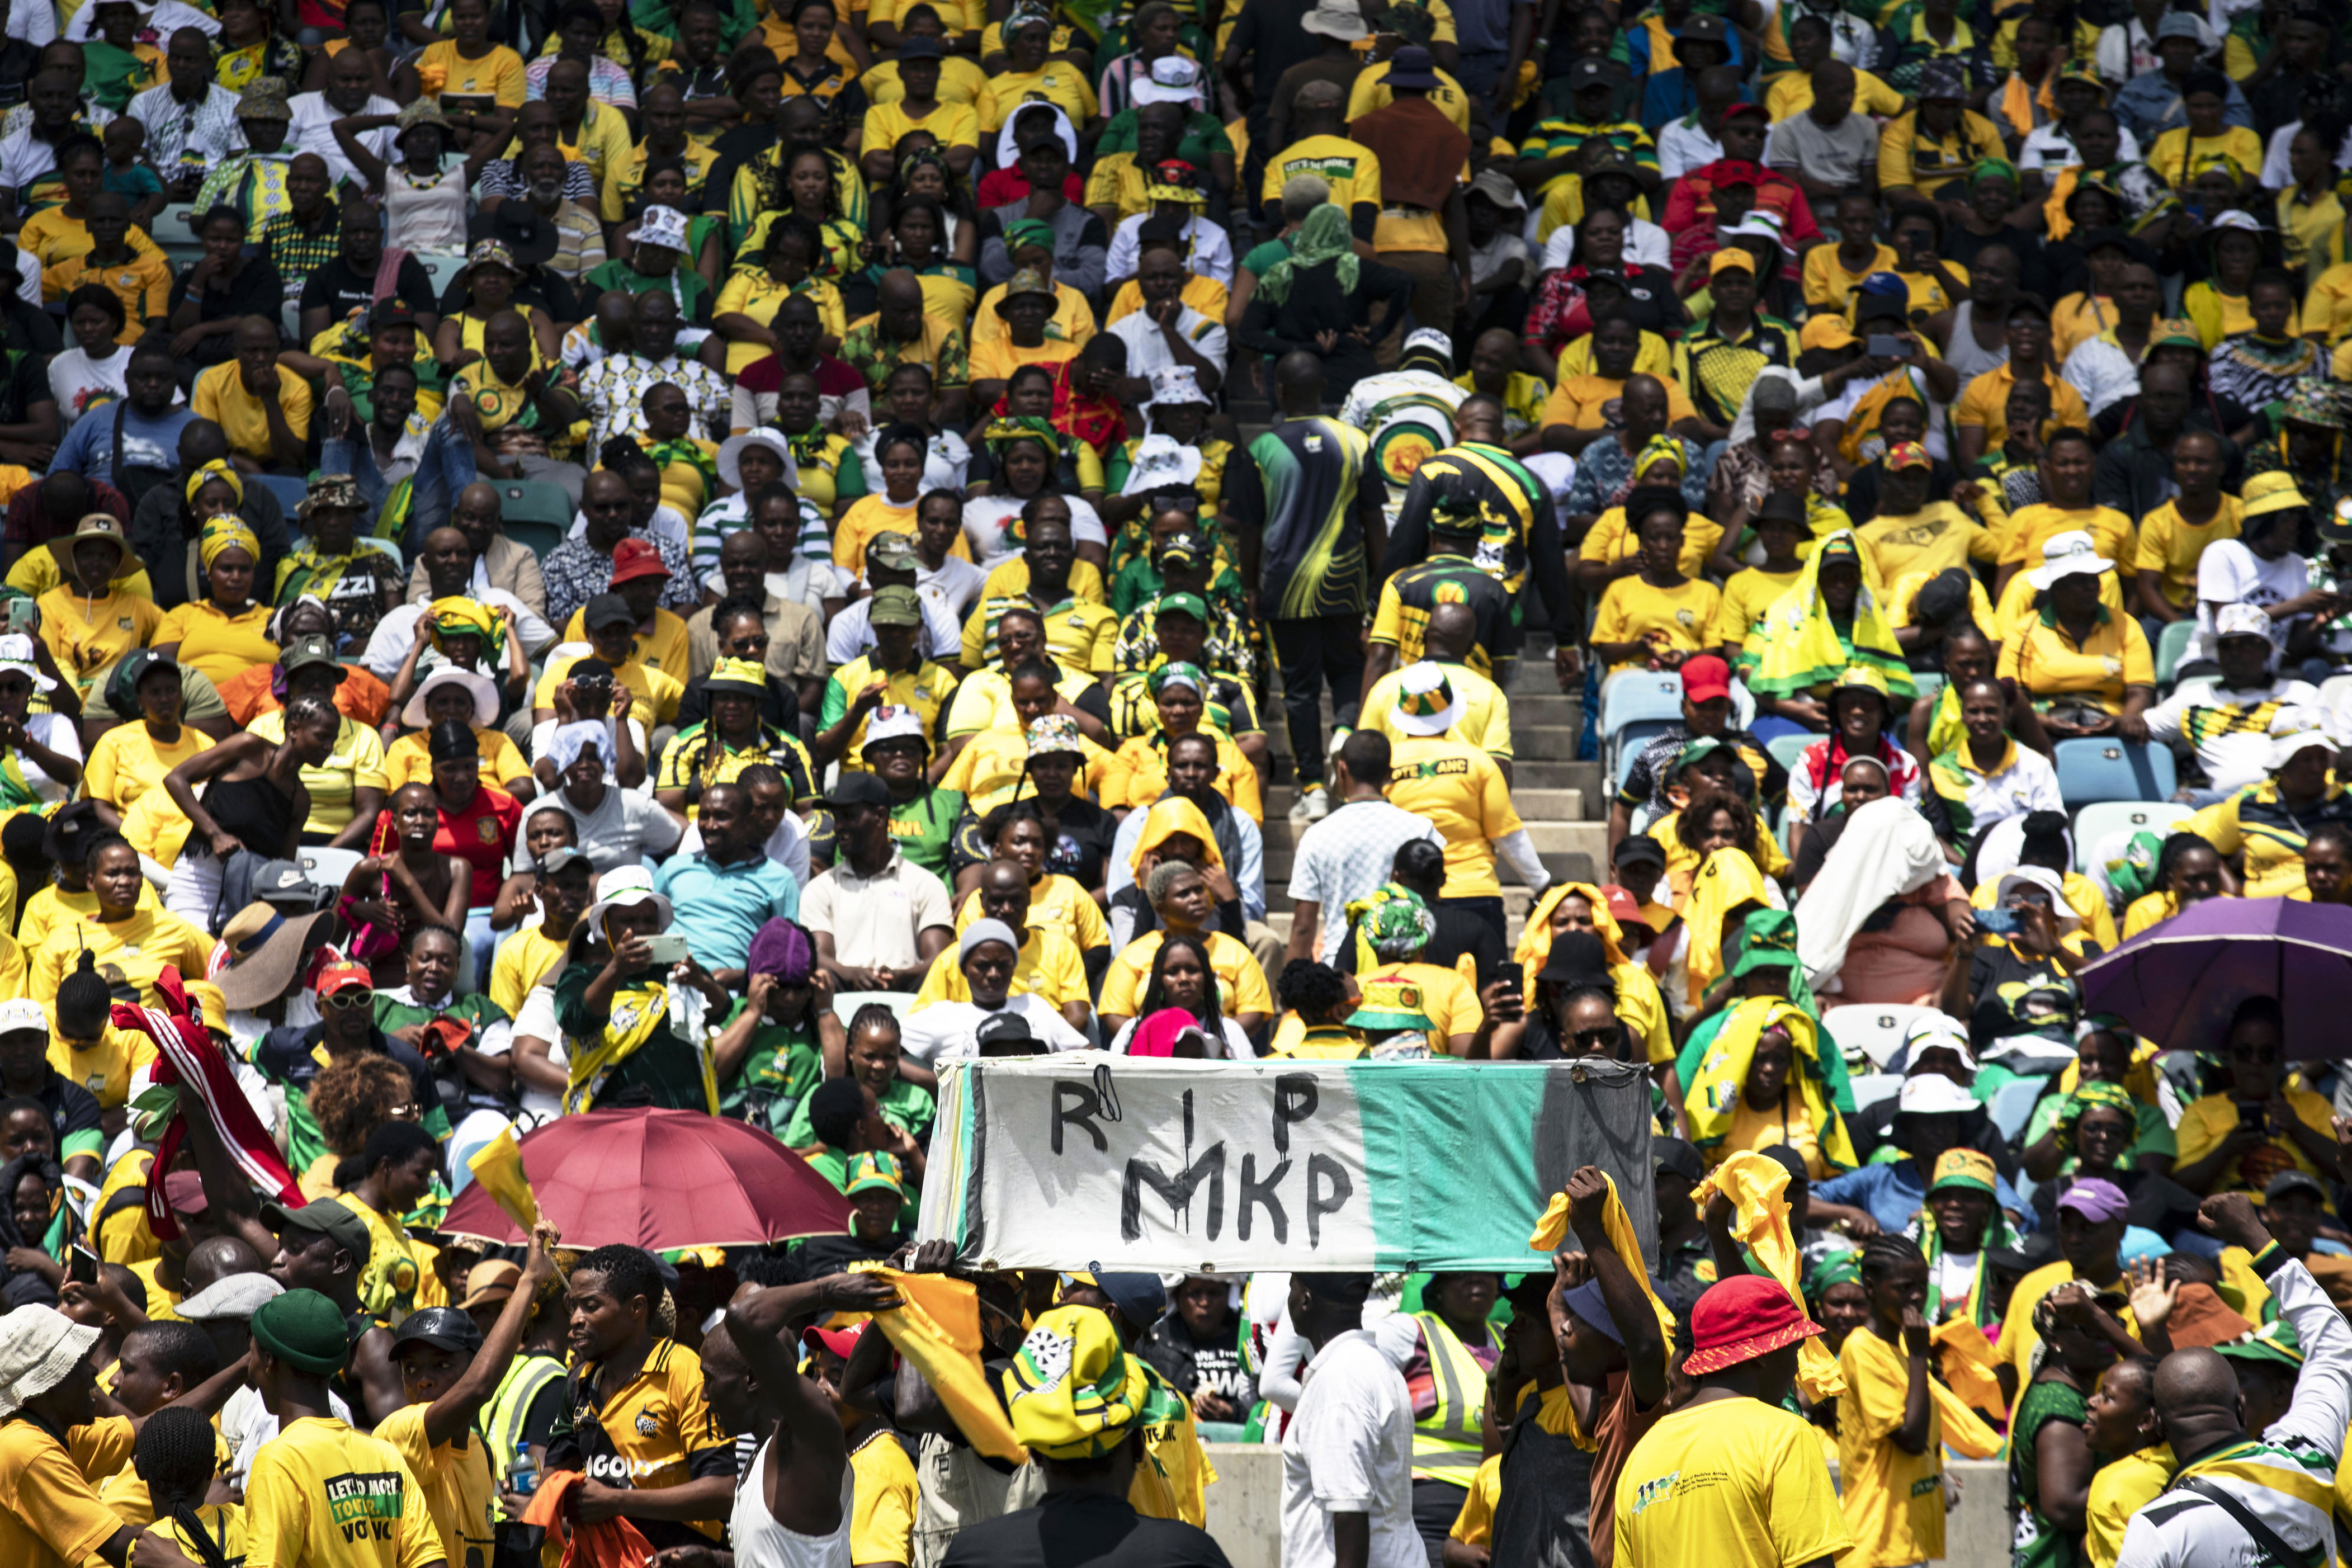 anc drops to 40.2% in support poll as zuma’s mk campaigns to cannibalise ruling party votes